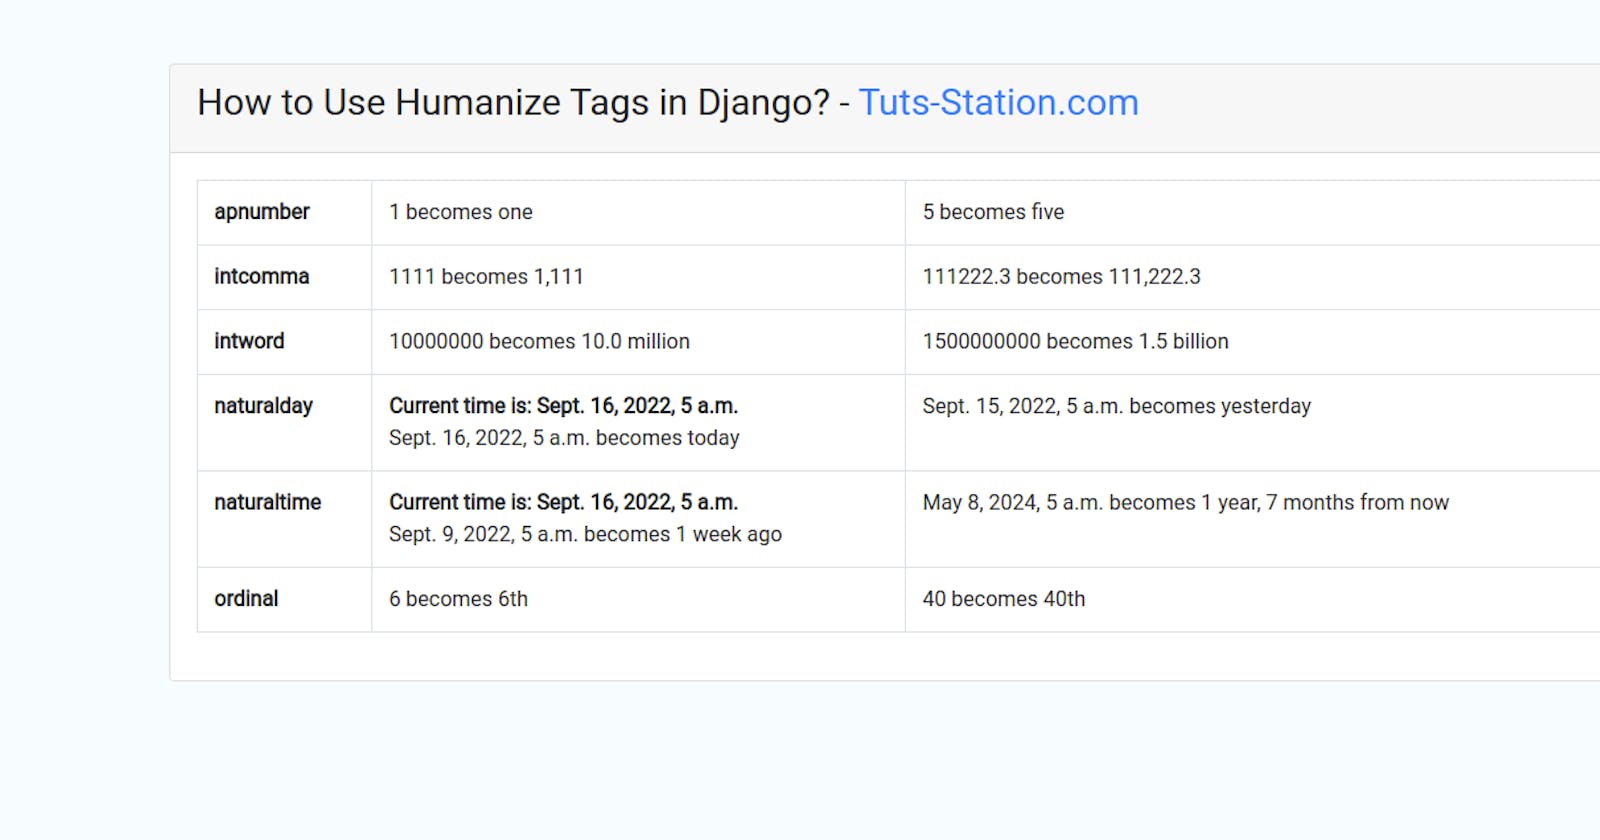 How to use Humanize Tags in Django?